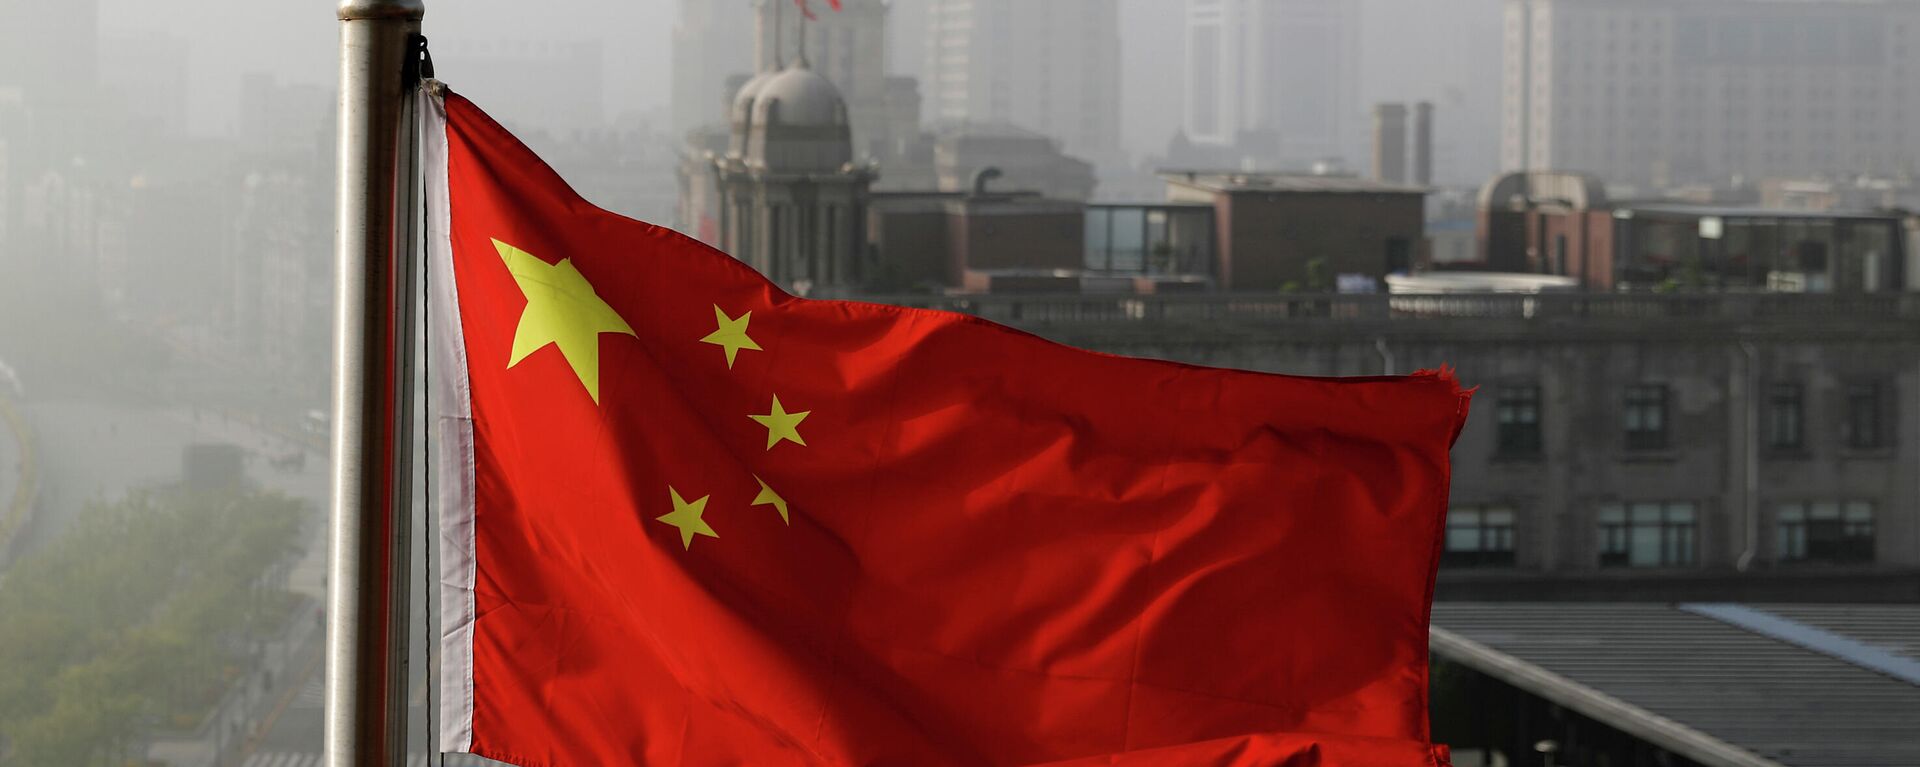 In this April 14, 2016 file photo, a Chinese national flag flutters against the office buildings in Shanghai, China.  - Sputnik International, 1920, 06.04.2022